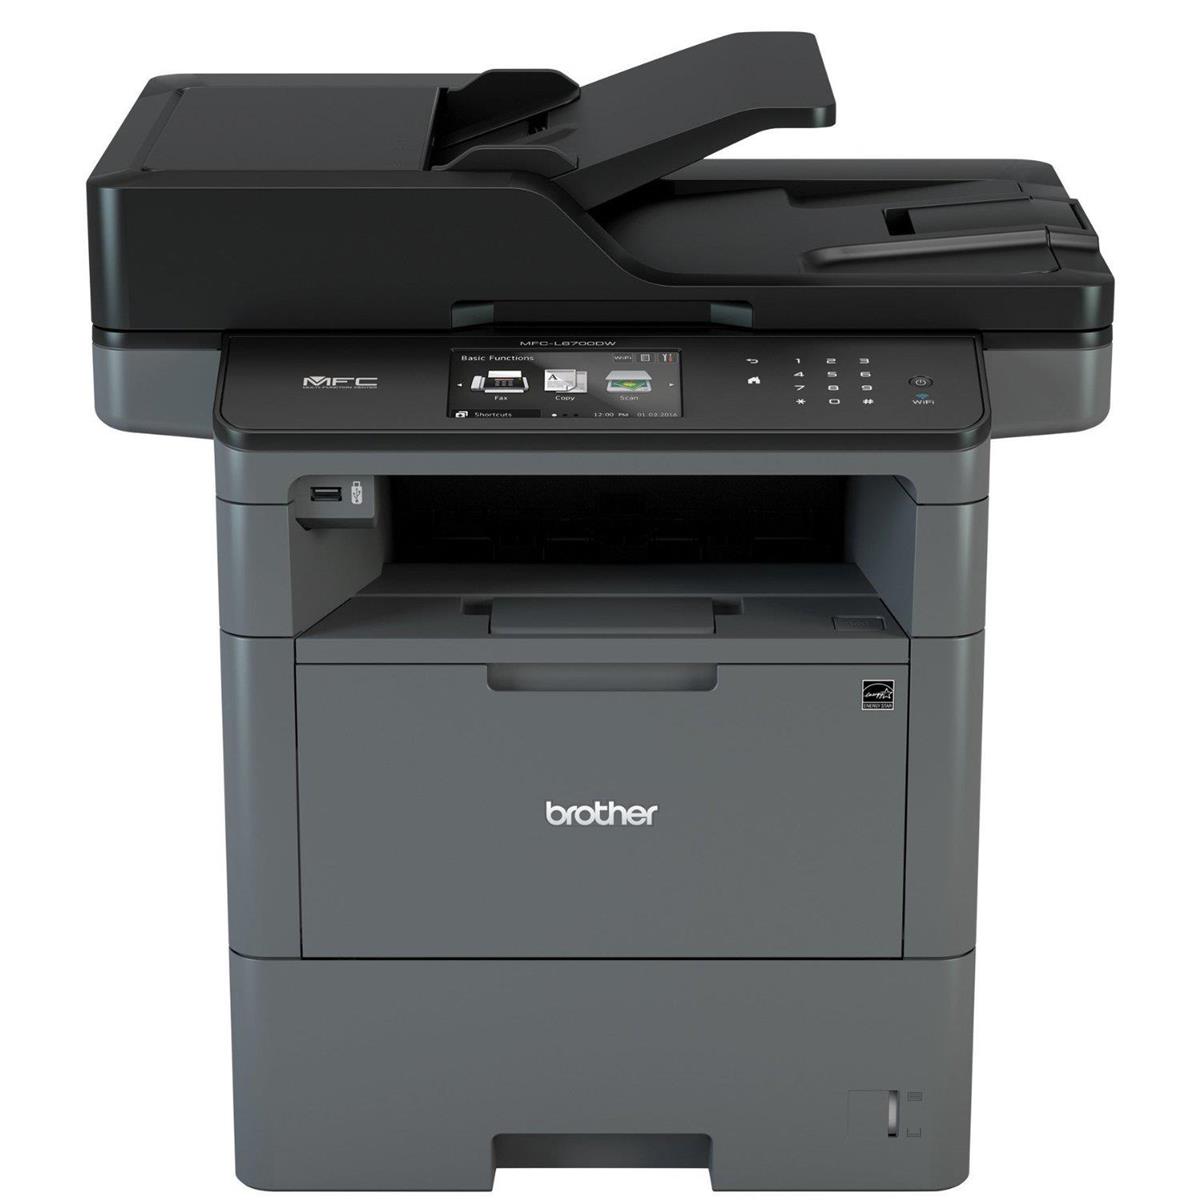 Image of Brother MFC-L6700DW All-in-One Monochrome Laser Printer